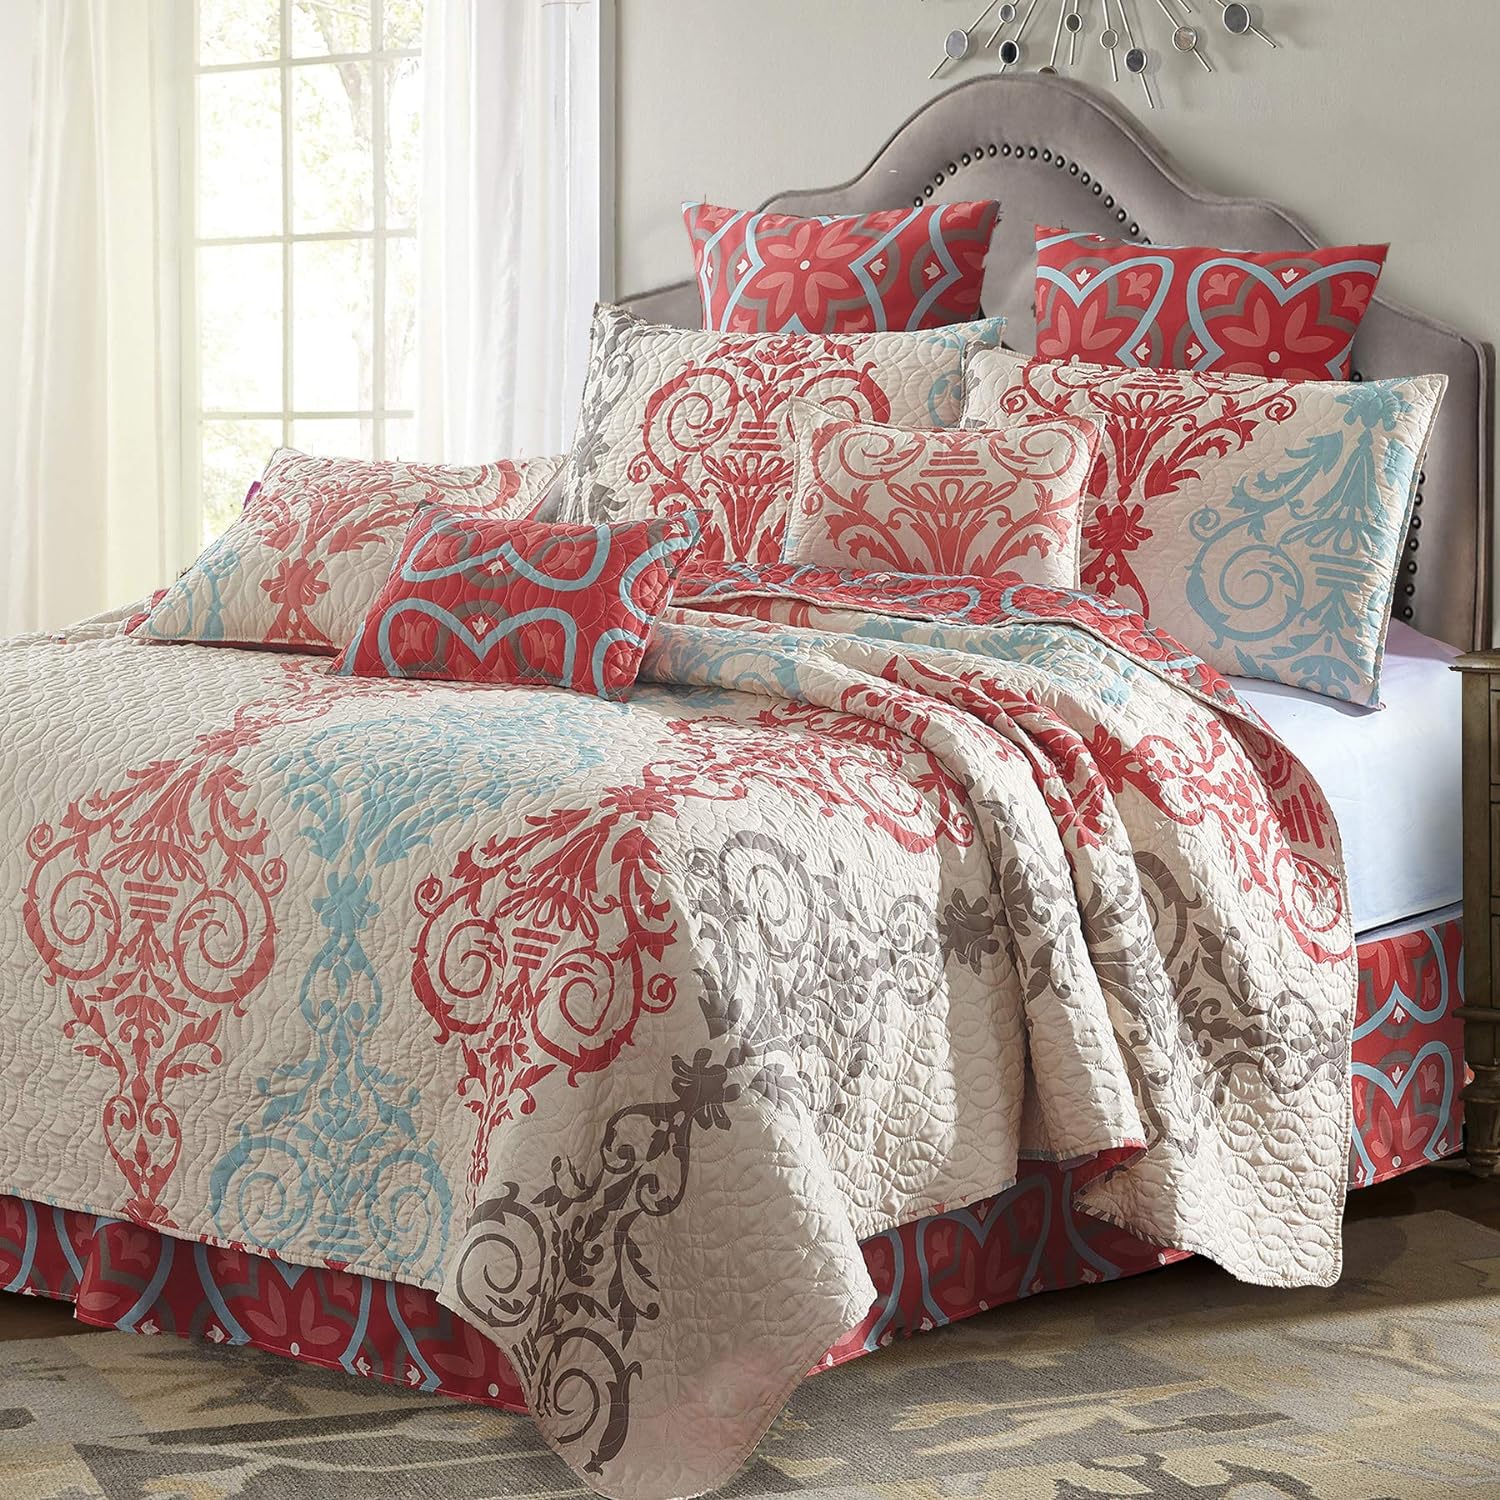 Virah Bella Quilt Bedding Set in King Portofino Printed Lightweight Reversible Quilt with 2 Matching Pillow Shams - Cozy & Beautiful Contemporary-Themed Bedding